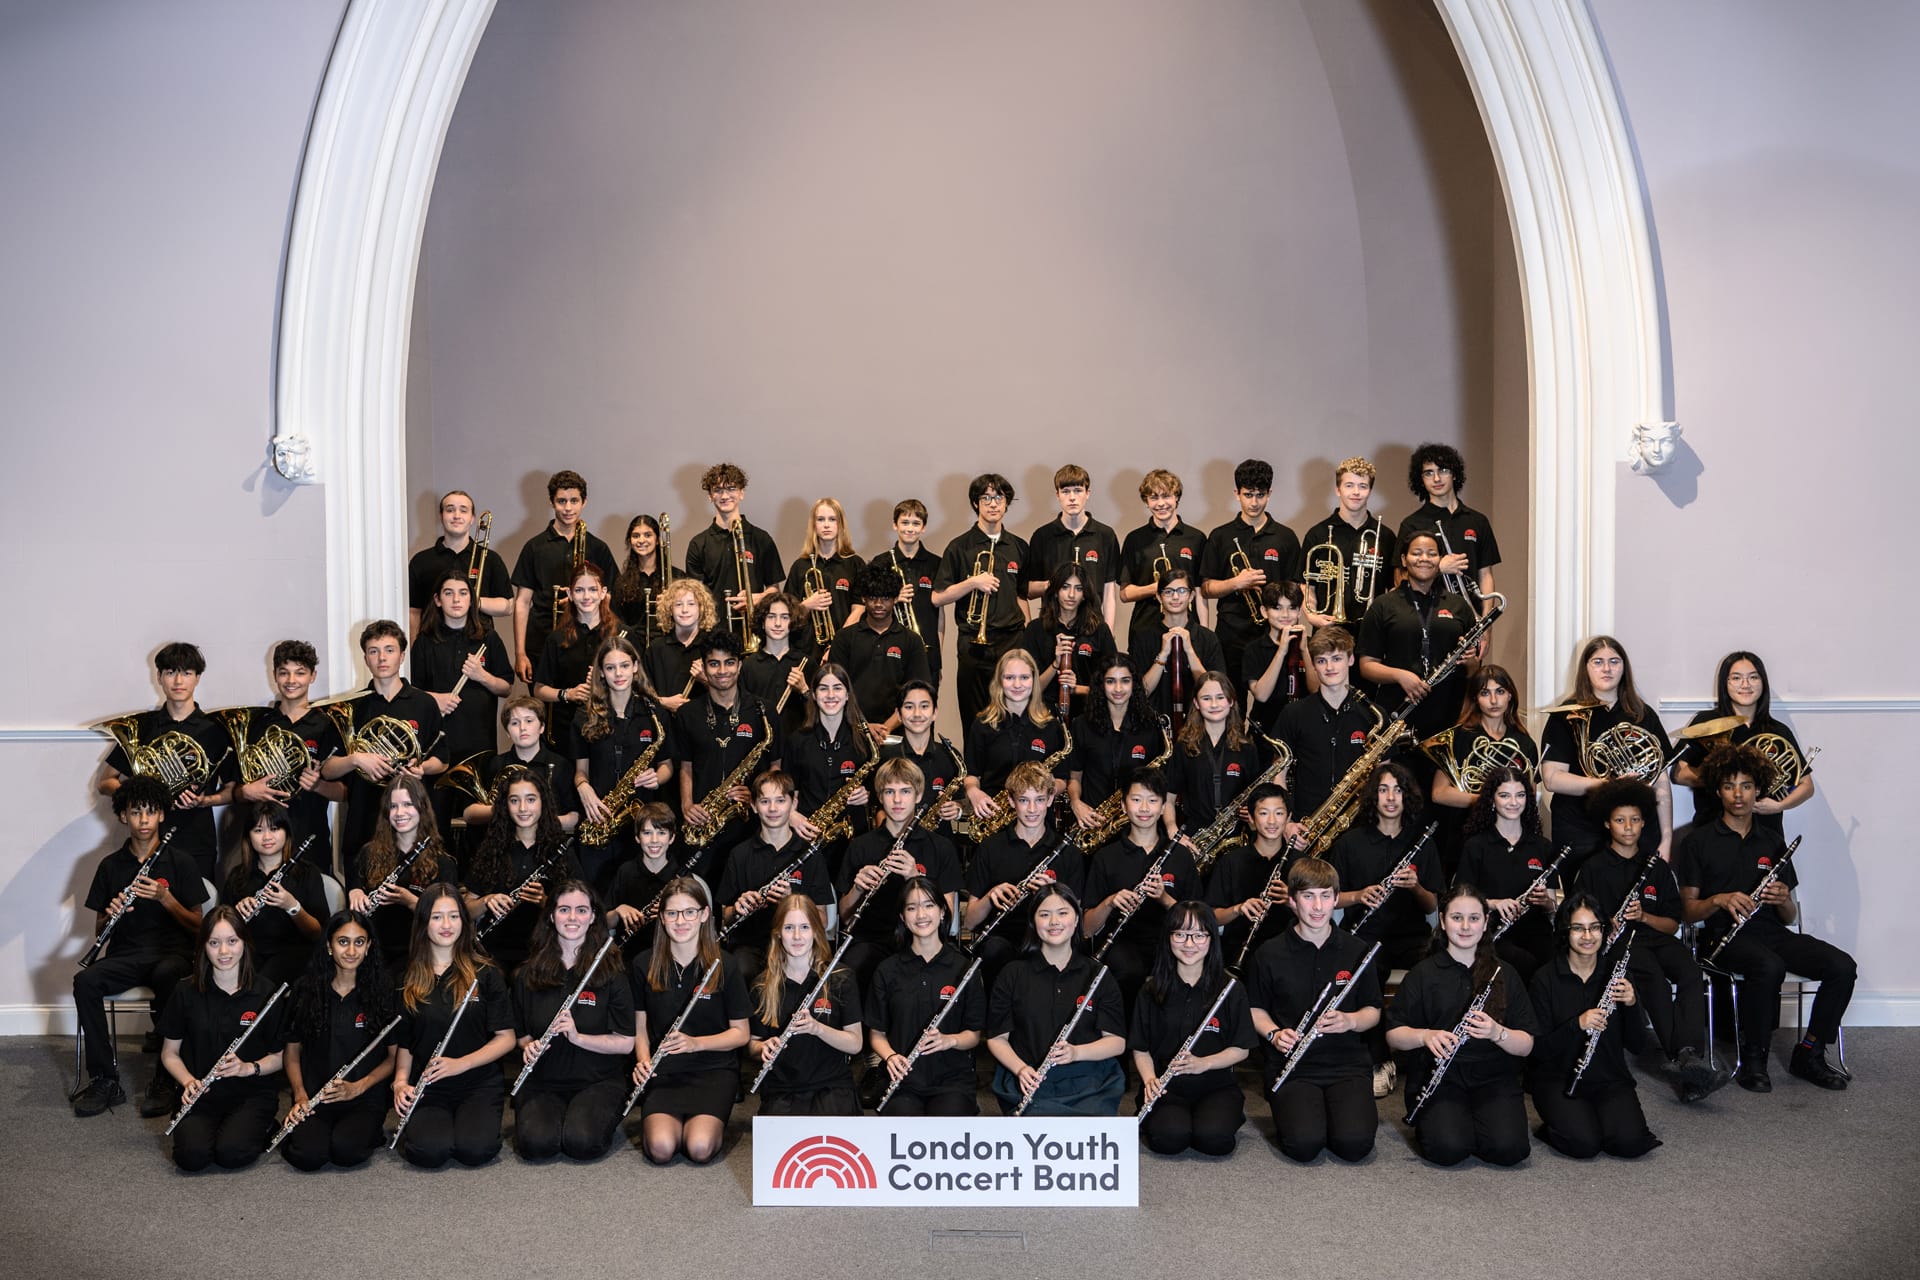 A full company photograph of the London Youth Concert band. Each member holds their instrument angled to the right. They wear uniform black shirts, and are posed underneath a large white arch.